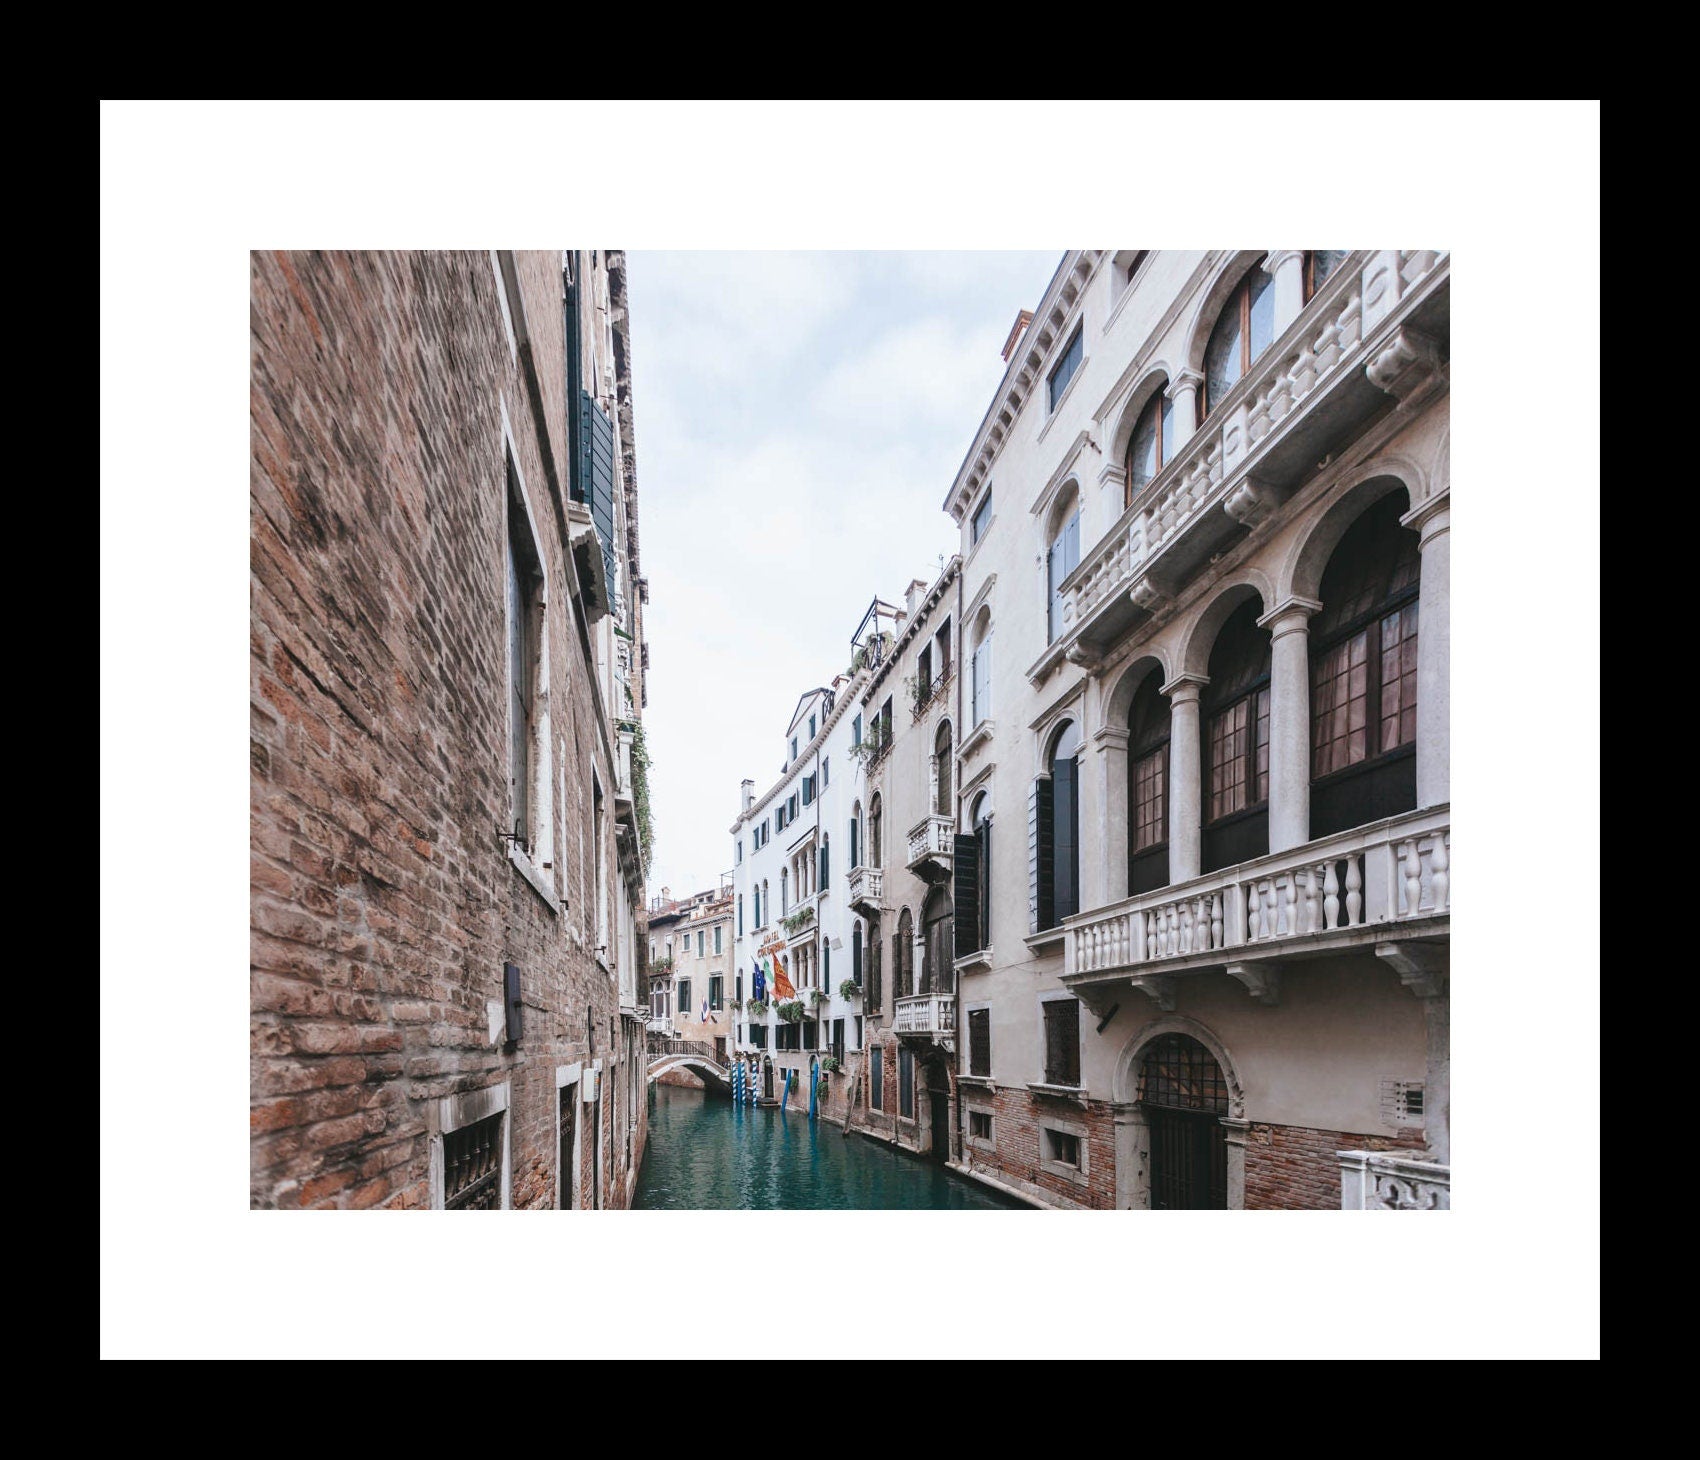 Venice Italy Photography, Travel Photos for Wall, Unframed Art or Canvas, European Vacation, Living Room, Office, Canal Landscape - eireanneilis